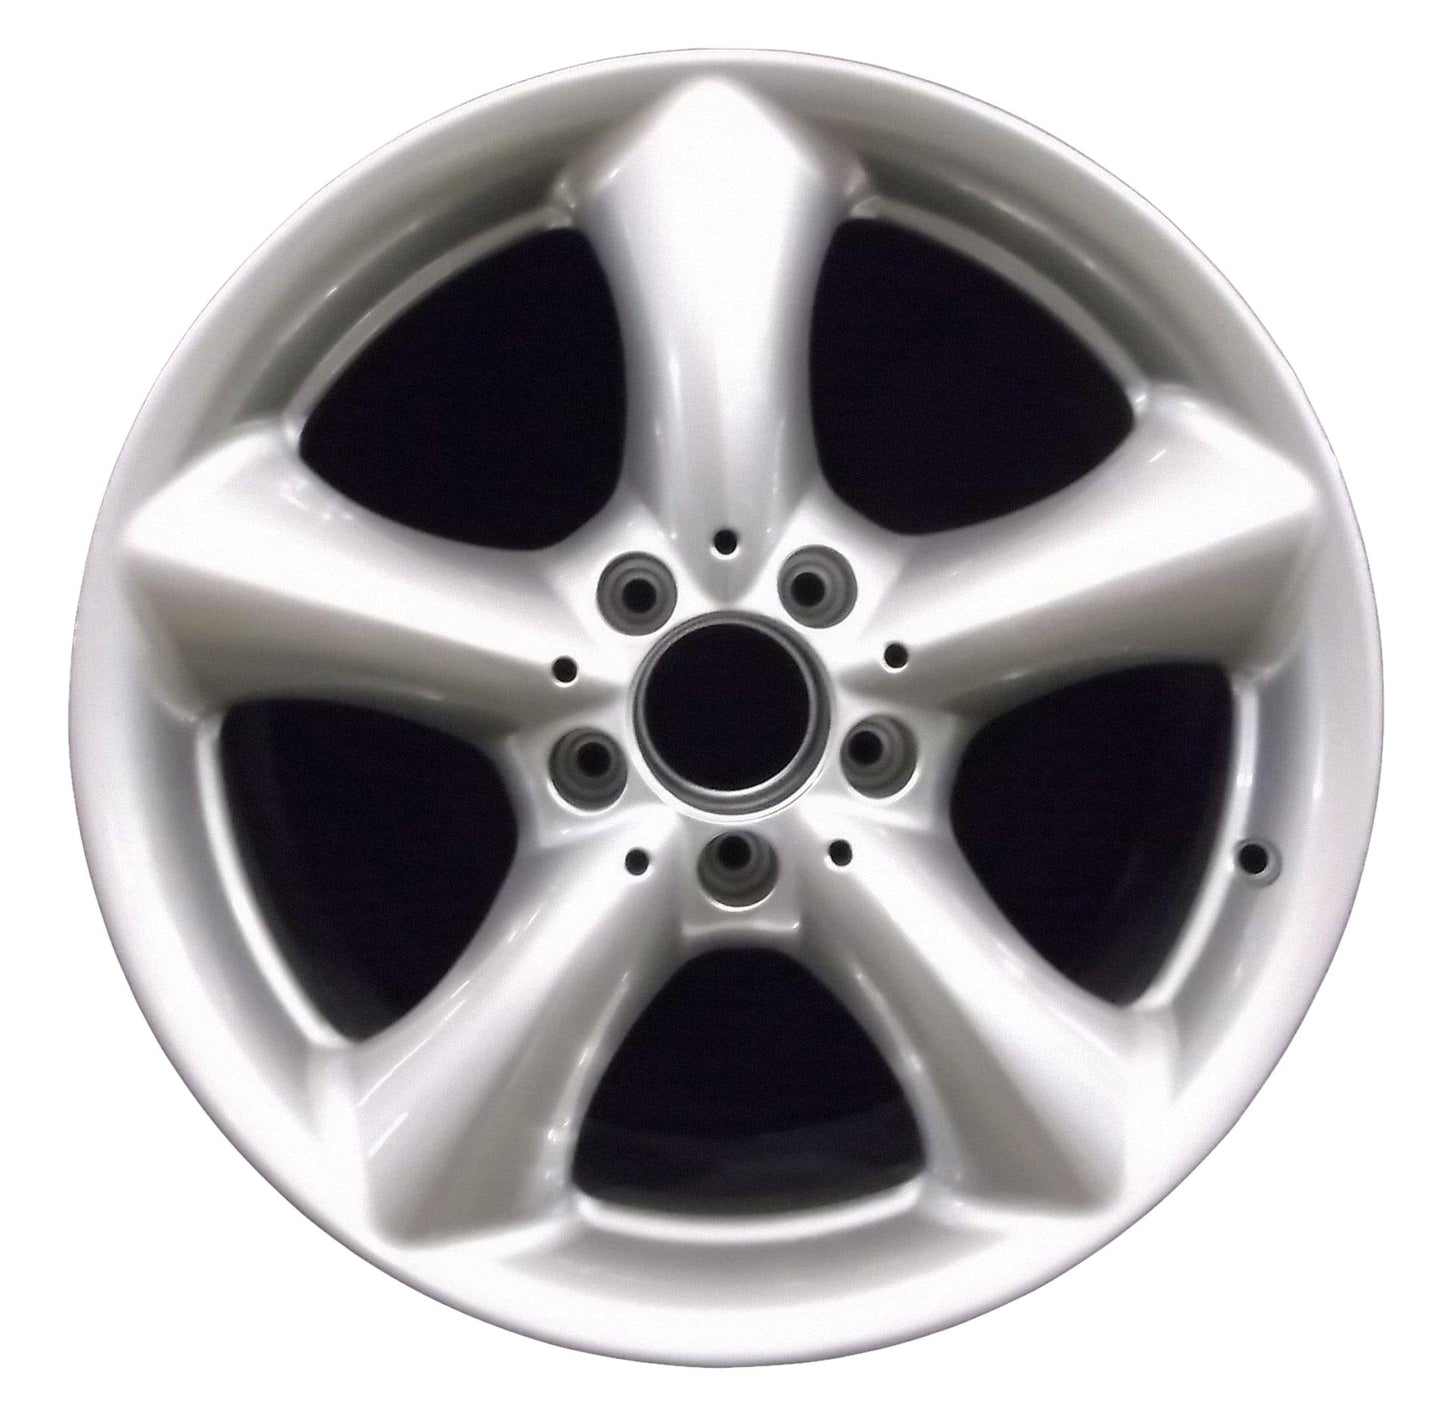 Mercedes CLK320  2003, 2004, 2005 Factory OEM Car Wheel Size 17x8.5 Alloy WAO.65289ARE.PS11.FF